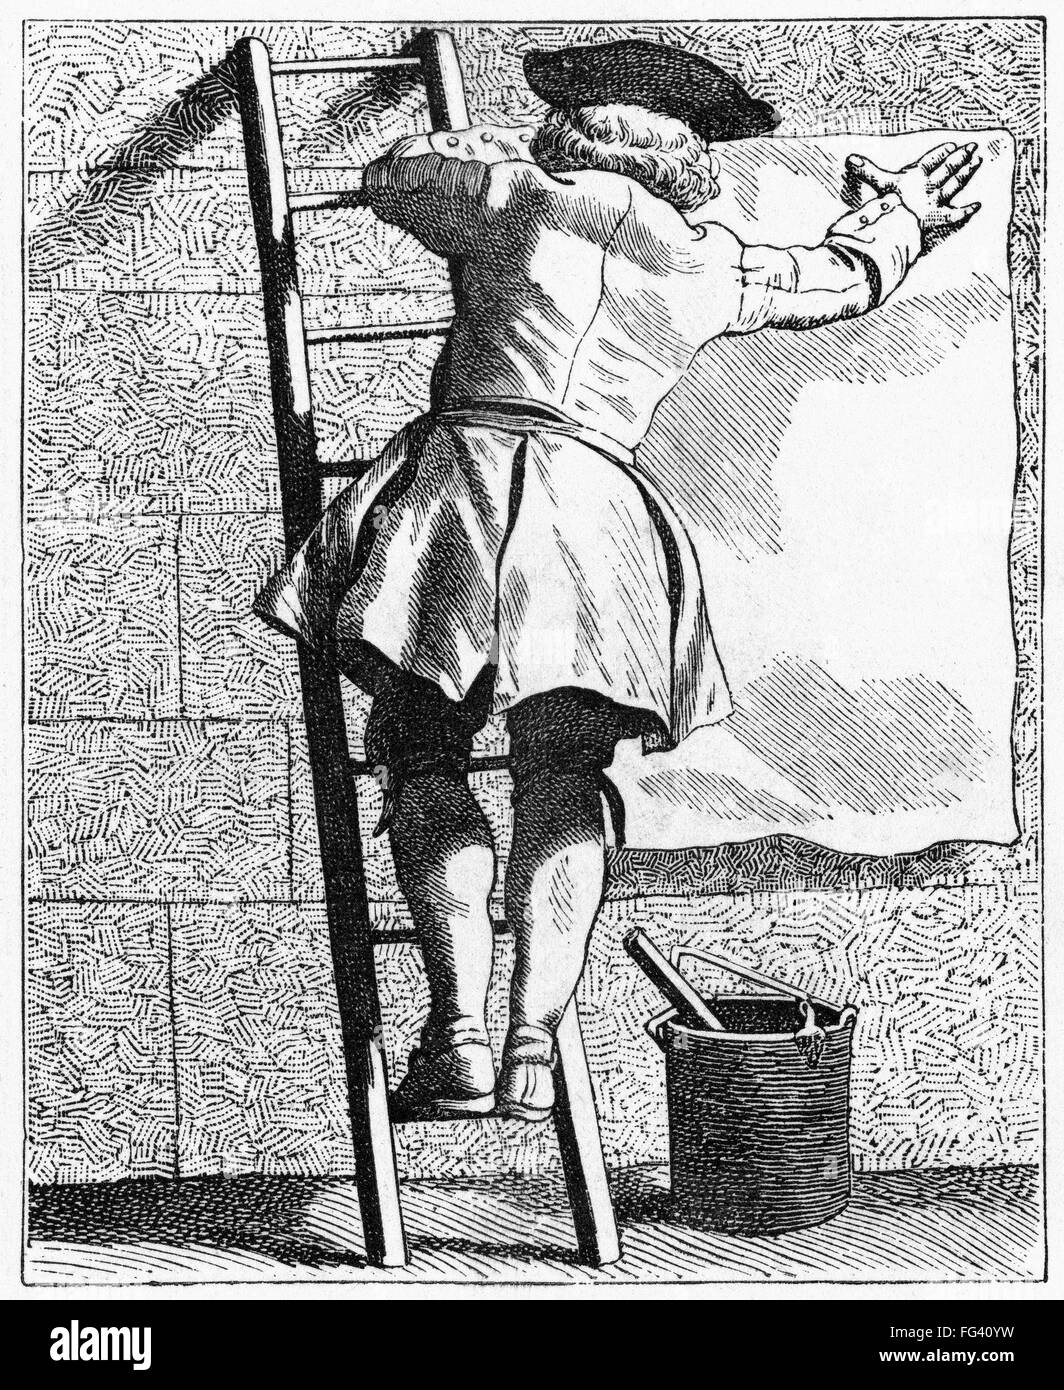 PARIS: AFFICHEUR, c1740. /nA man hanging posters in Paris, France. Engraving, 1875, after an etching by EdmΘ Bouchardon, c1740. Stock Photo